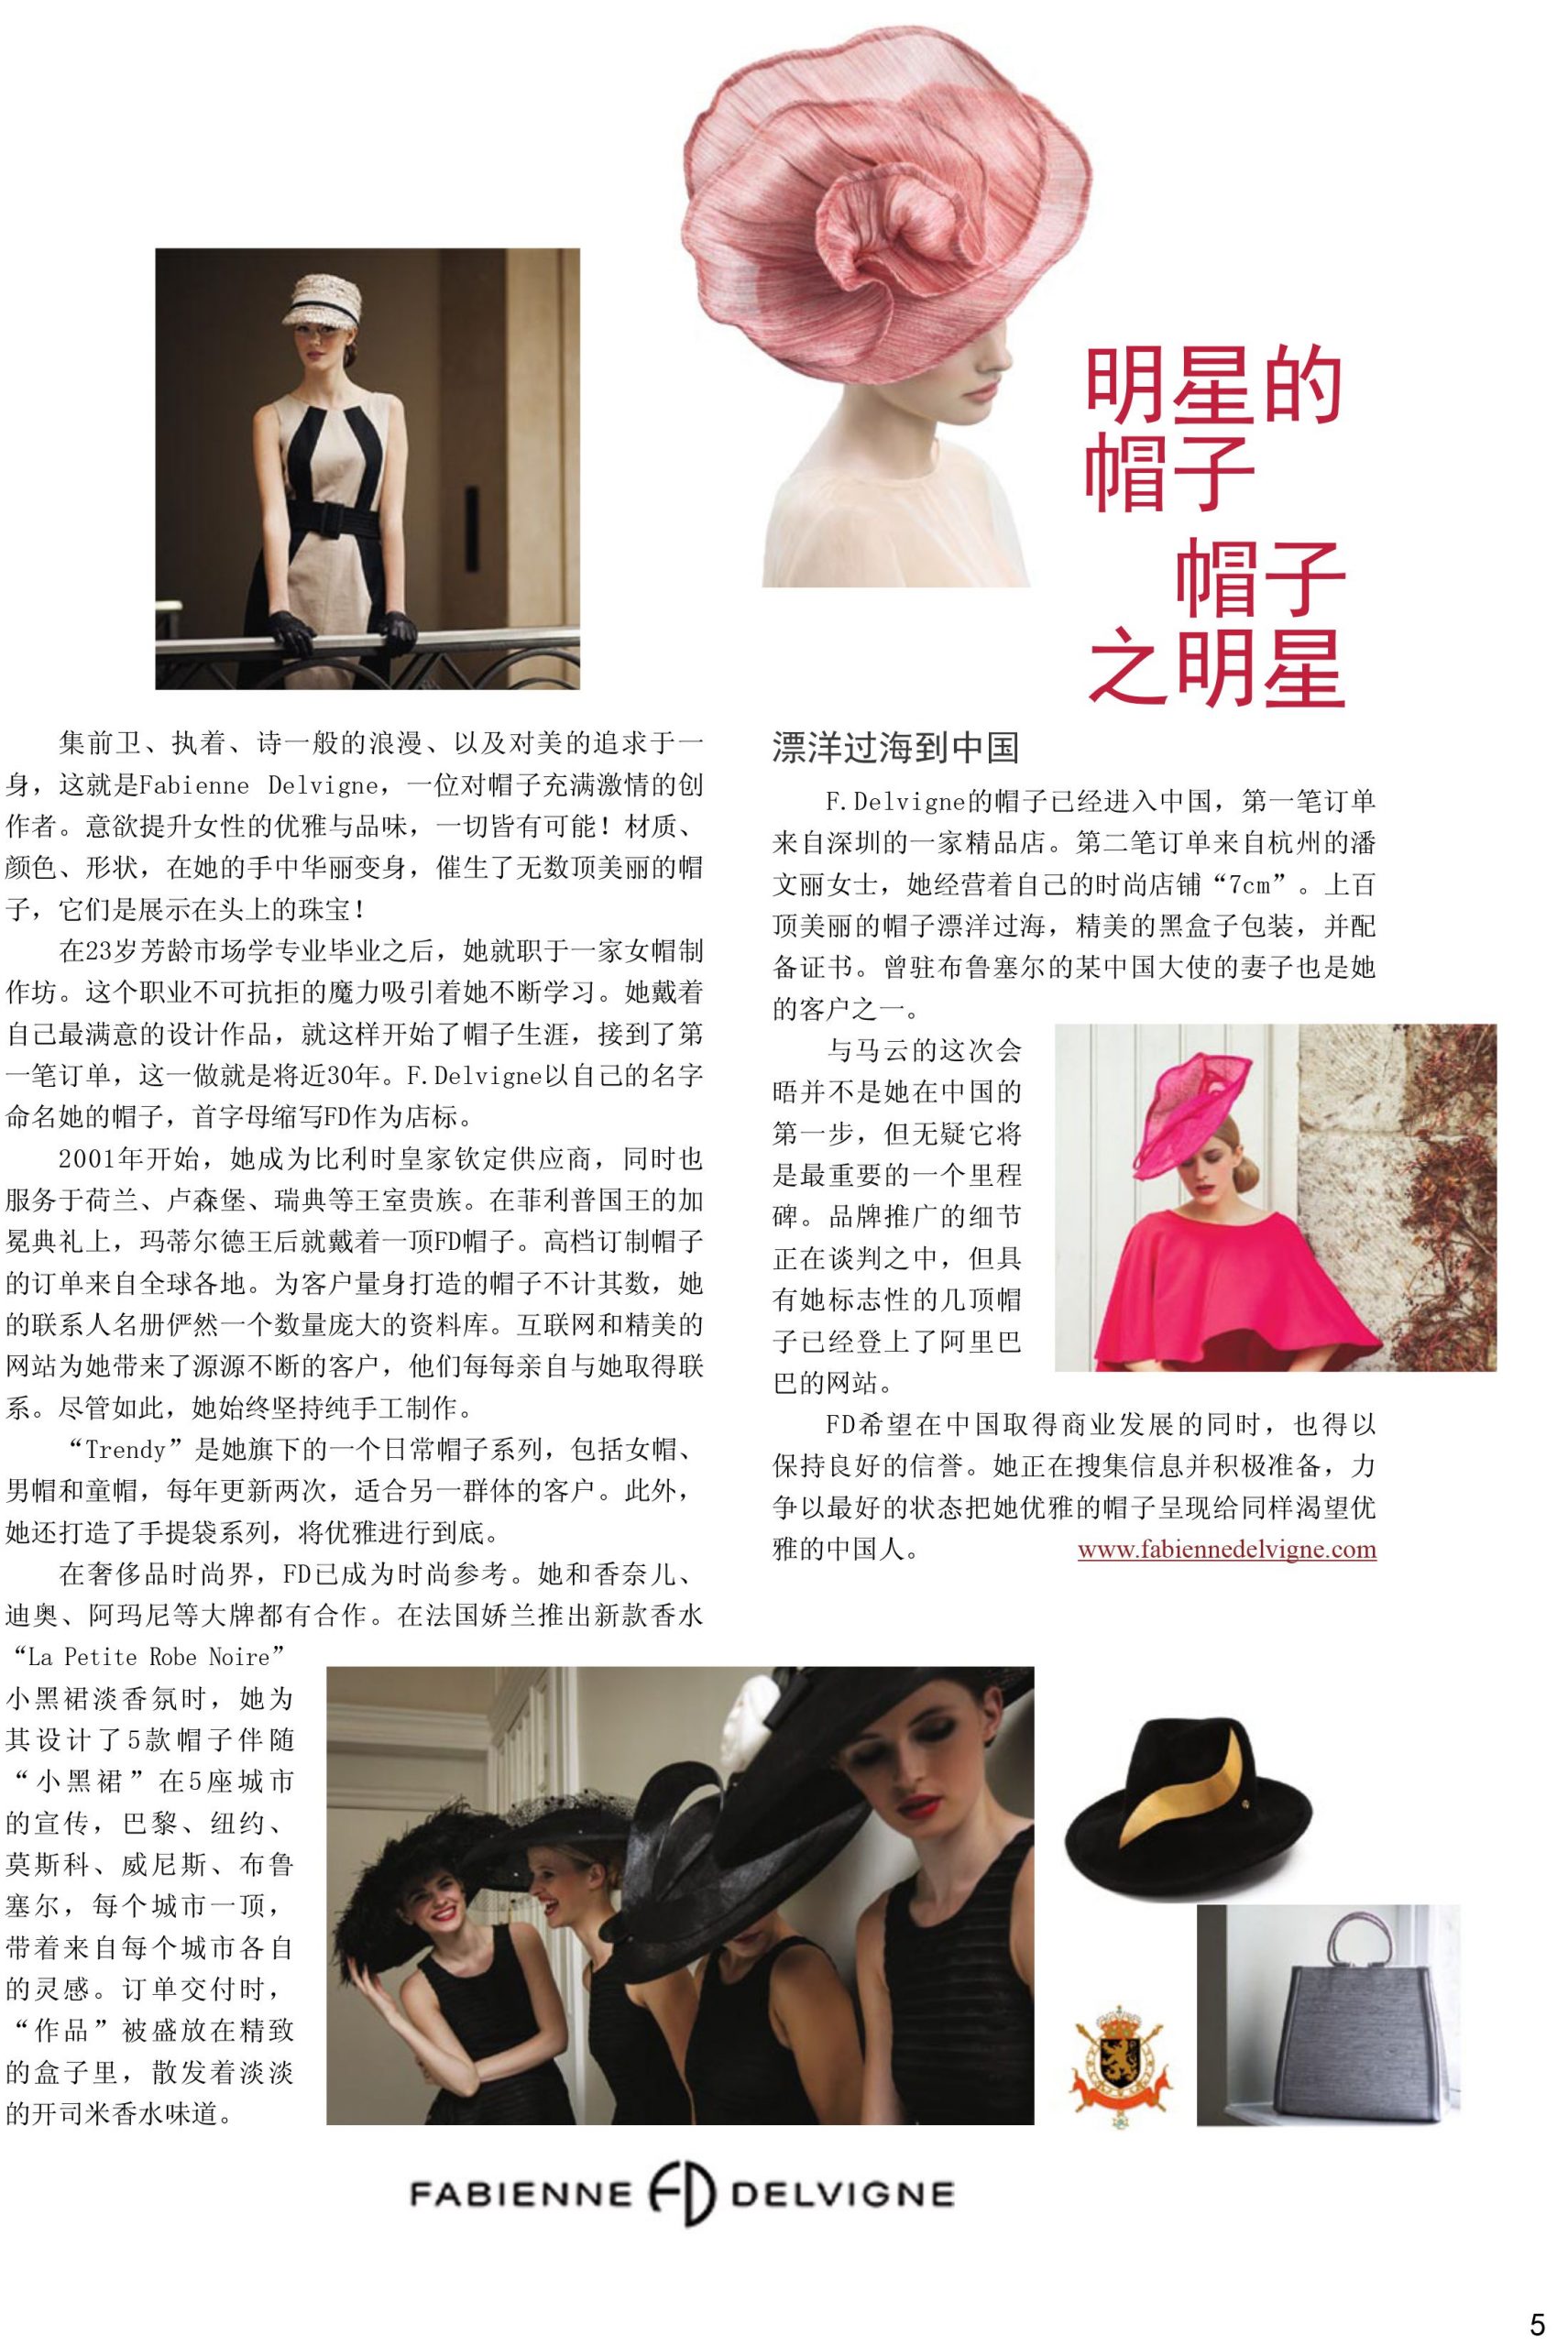 Chinese article - fabienne delvigne